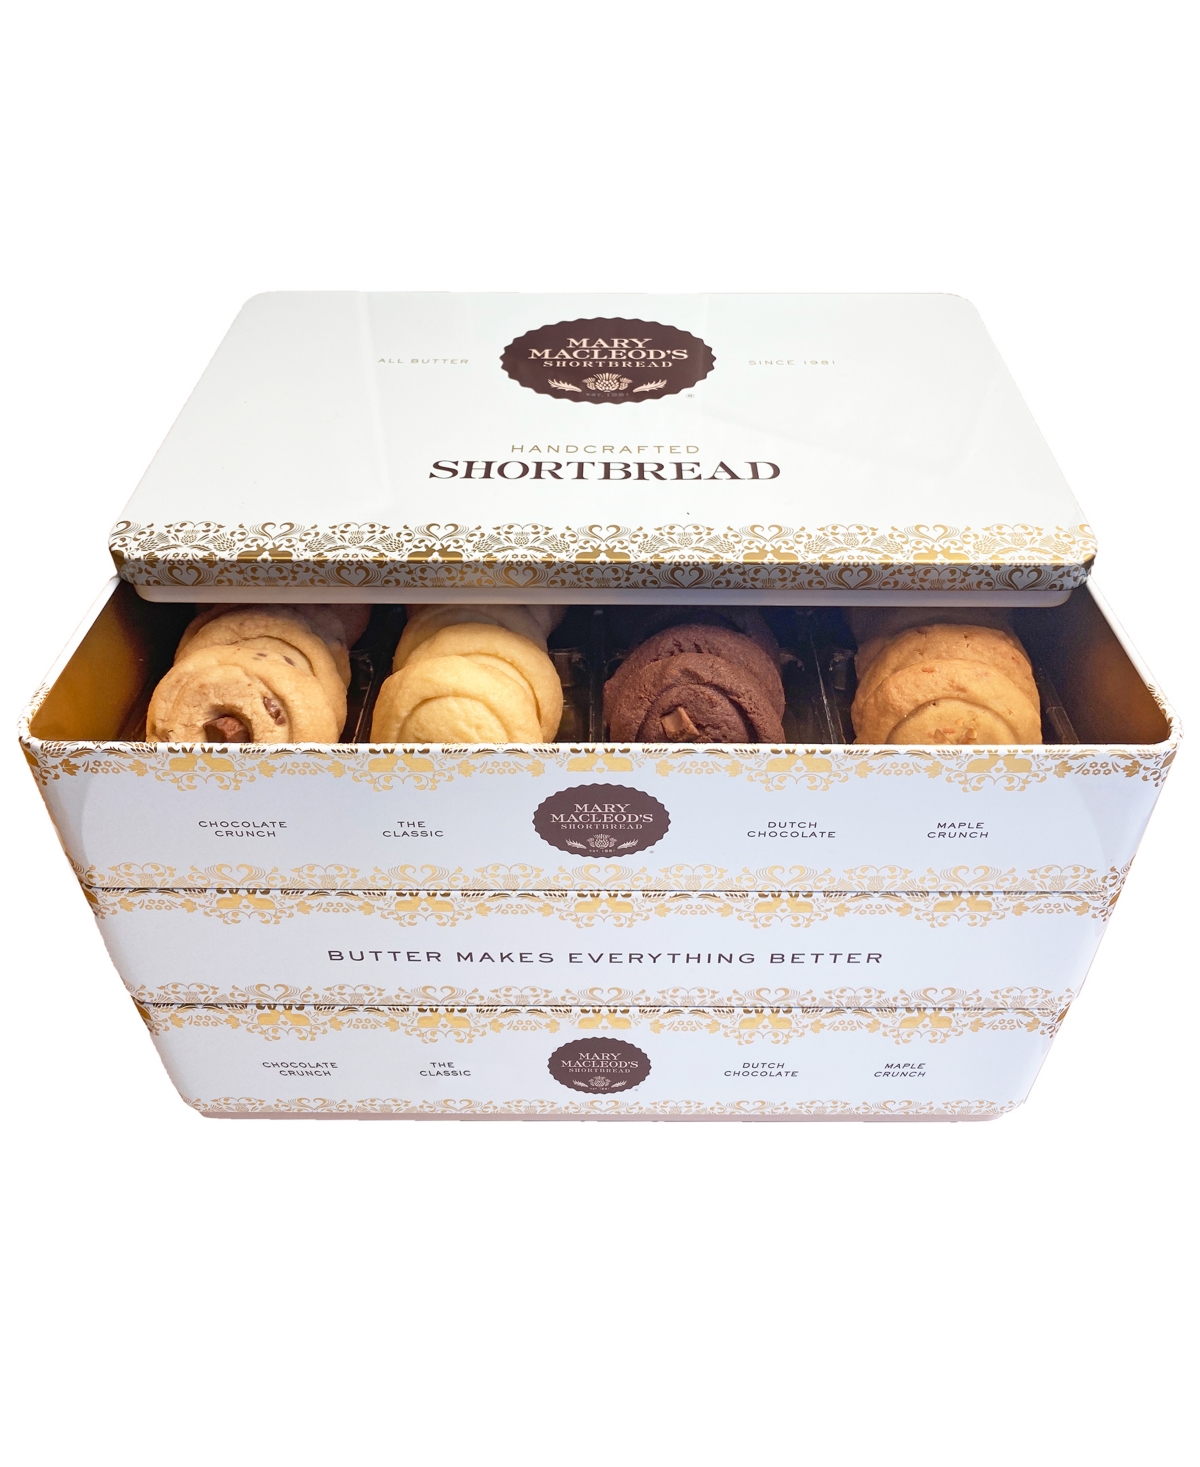 Shop Mary Macleod's Shortbread Mary Macleod's Variety Signature Cookie Tin Shortbread Cookies Gift, 72 Cookies In No Color